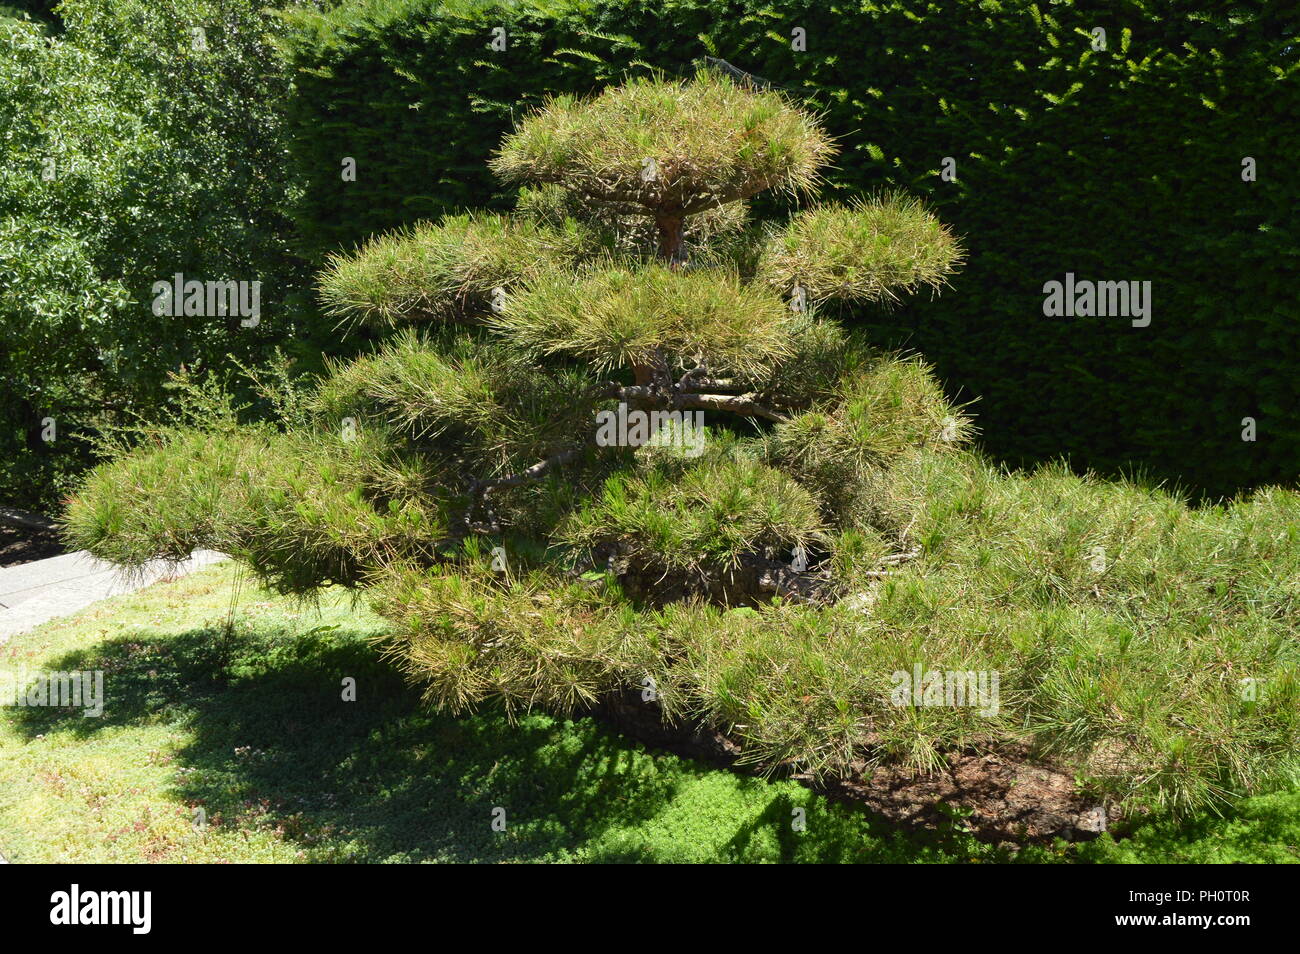 Green Curved Bonsai Tree Grows In Japanese Garden Landscape Design In Japanese Style Stock Photo Alamy,Purple Wallpaper Designs